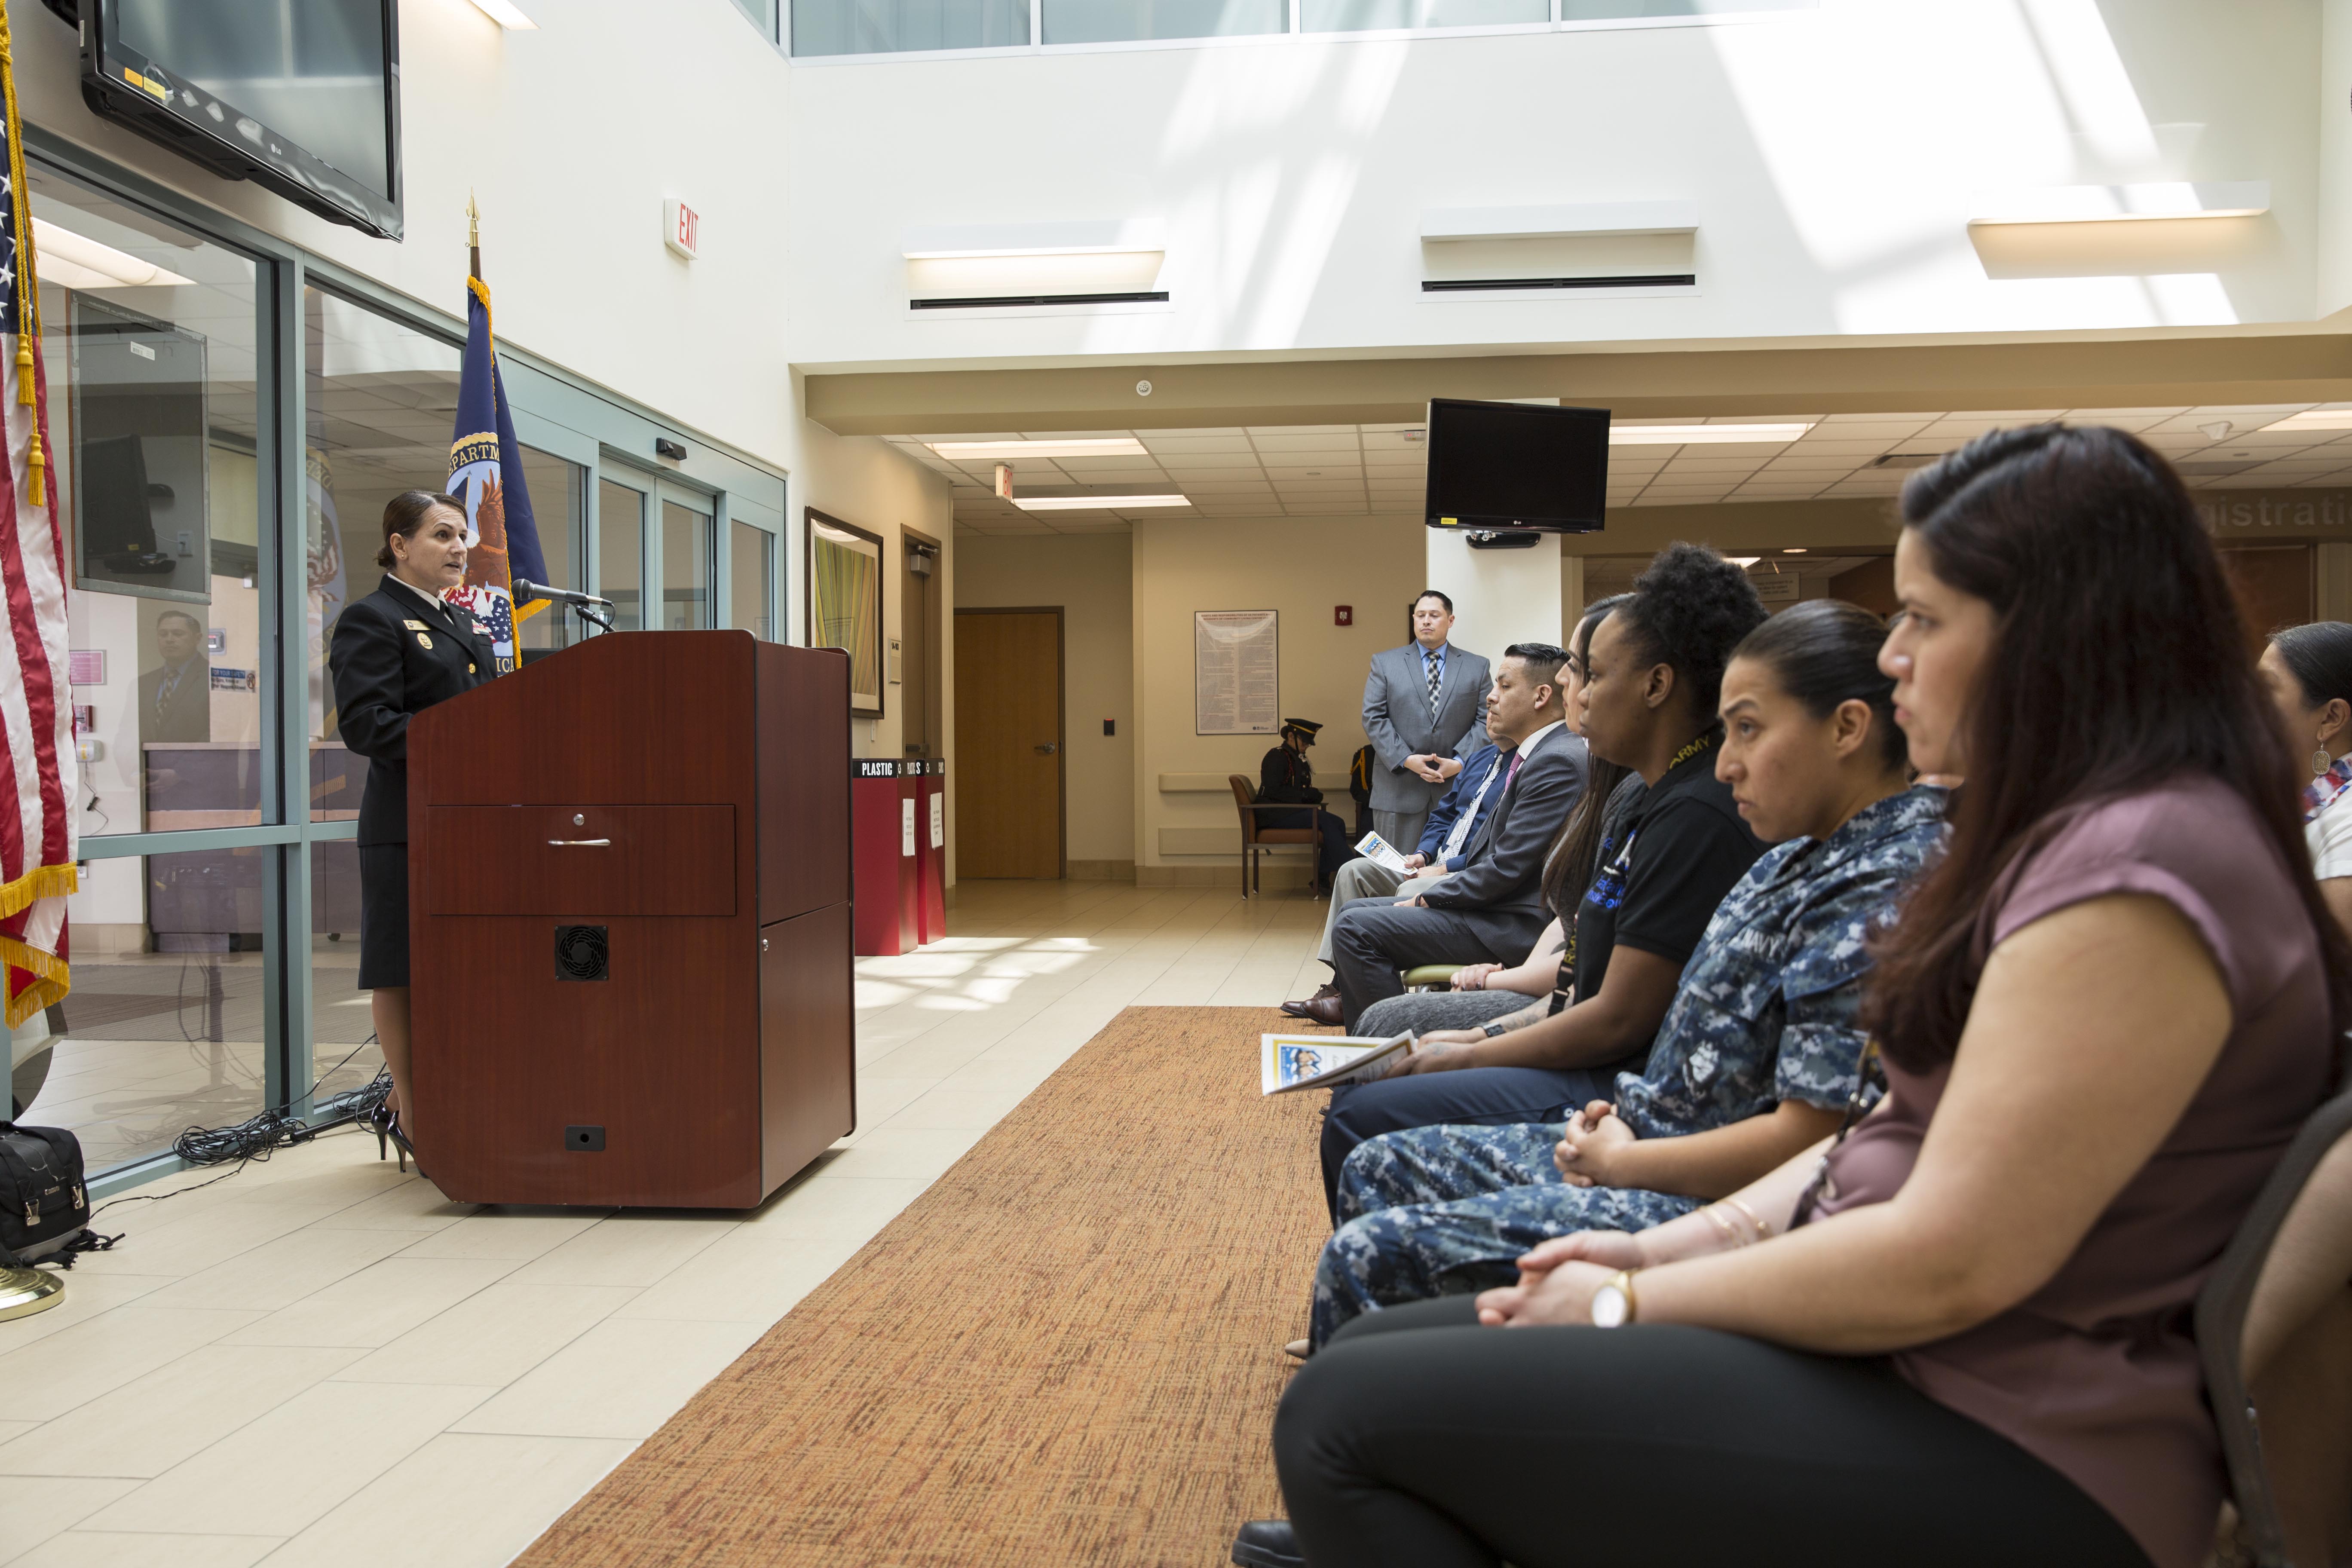 Chief Petty Officer Teresita Garcia the senior enlisted leader at the Navy Operational Support Center in Harlingen, Texas, delivers her speech to people attending VA Texas Valley Coastal Bend Health Care System's ceremony in observance of national Women's History Month, which took place March 2, 2018, at the VA Health Care Center at Harlingen, Texas. The ceremony was held in honor of Women Veterans and was attended by more than 200 people. Chief Garcia spoke about some of barriers broken and milestones achieved by U.S. Women Veterans. (U.S. Department of Veterans Affairs photo/Luis H. Loza Gutierrez)